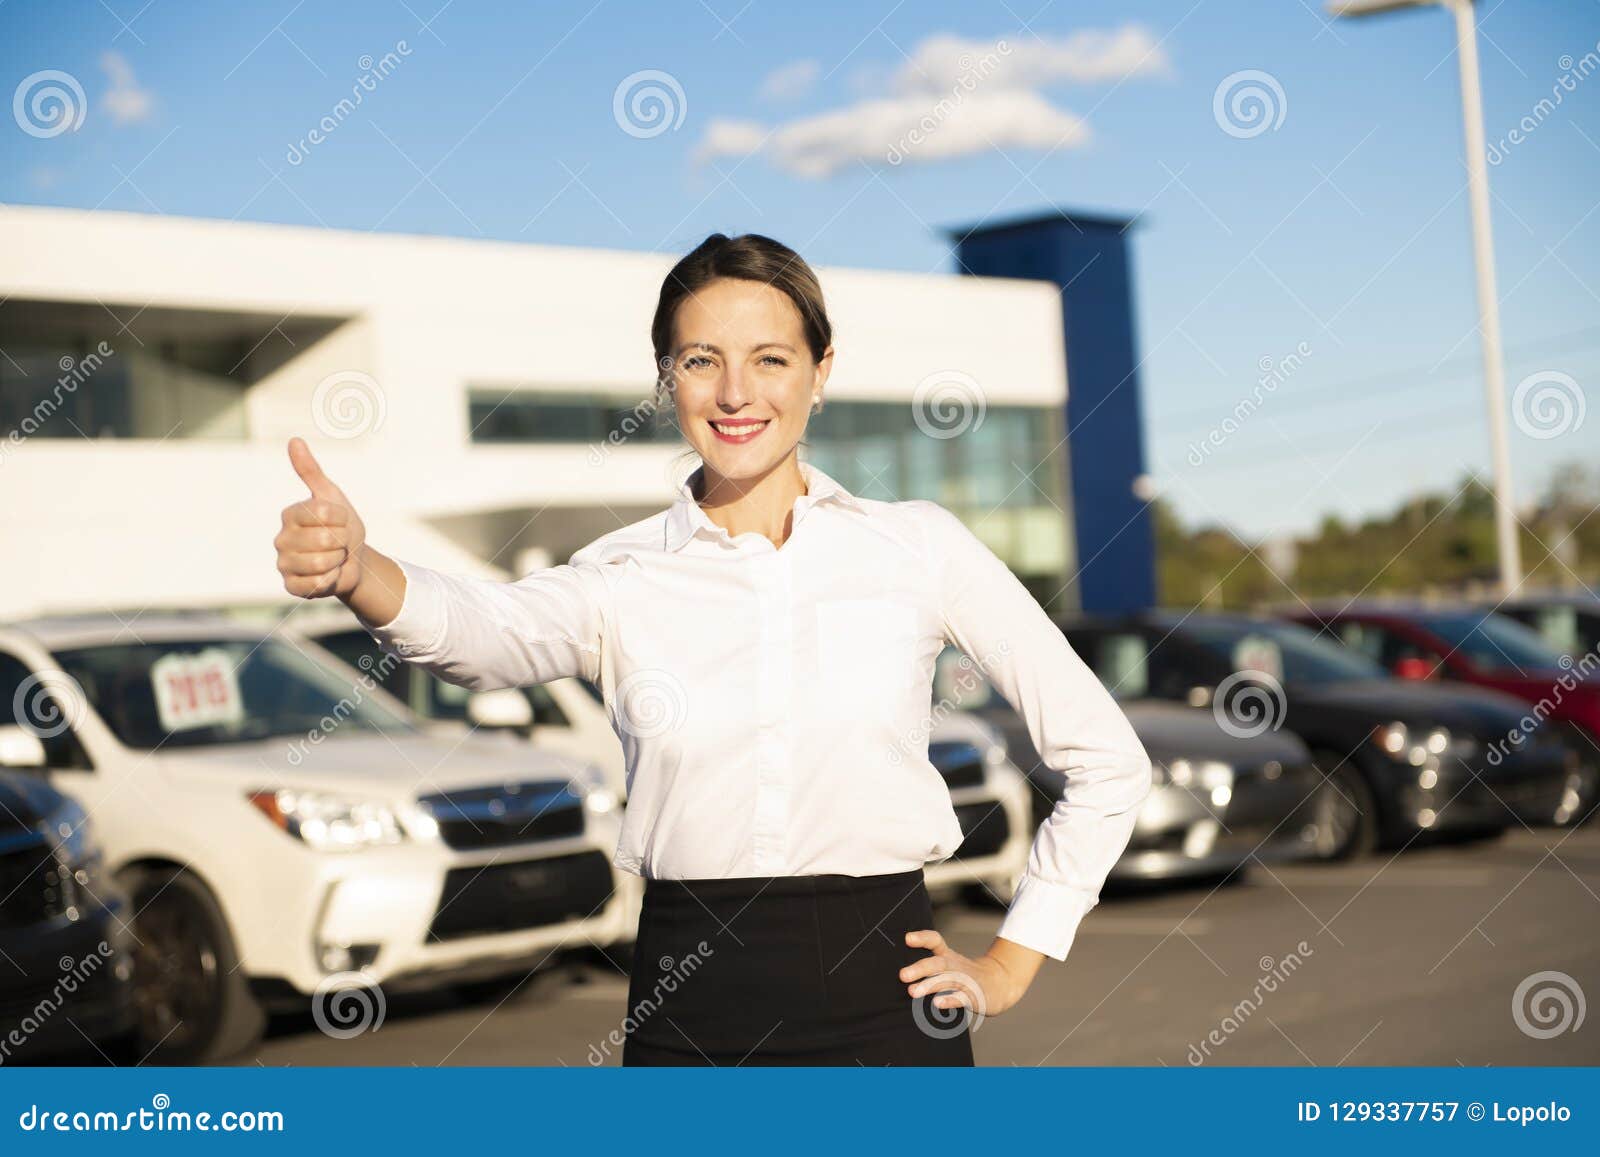 Young Woman Car Rental In Front Of Garage With Cars On The Bac